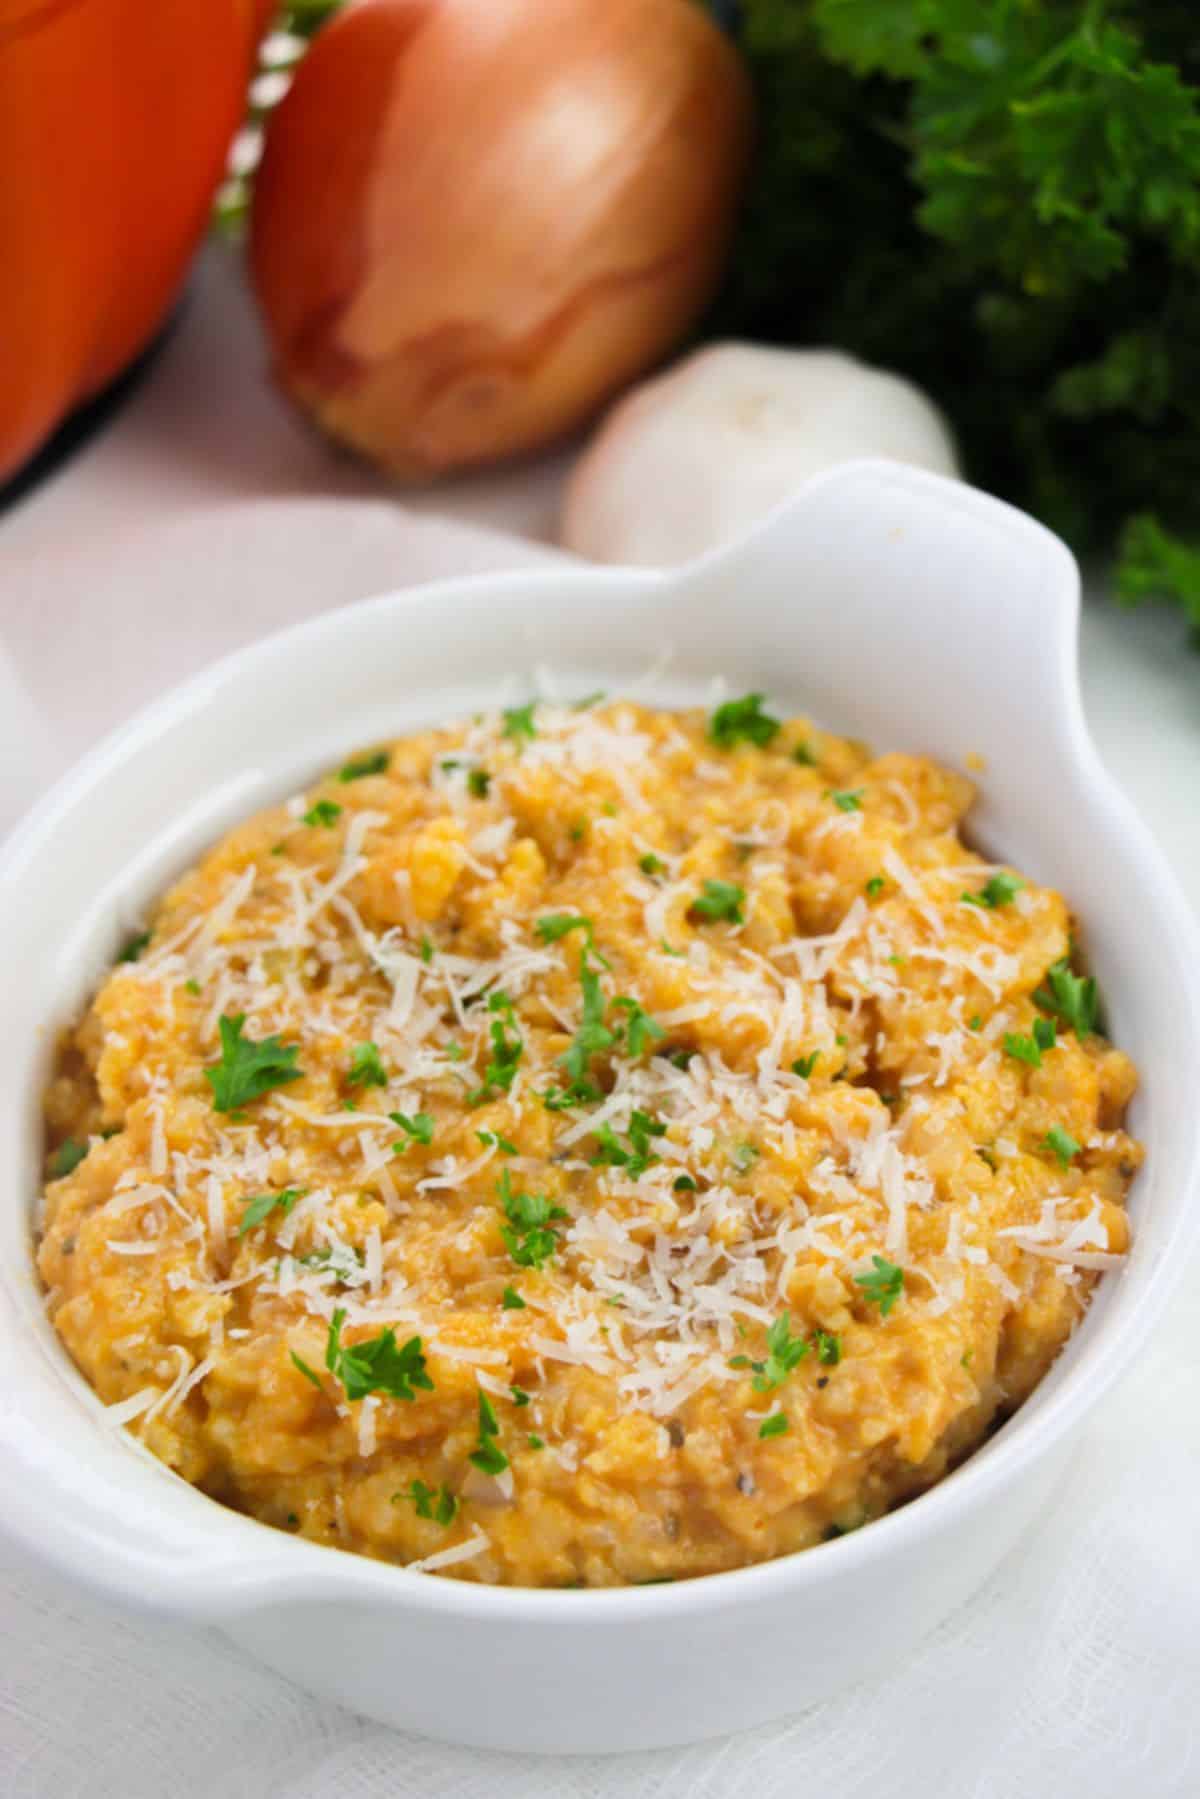 Pumpkin Risotto in a white bowl, garnished with parsley.